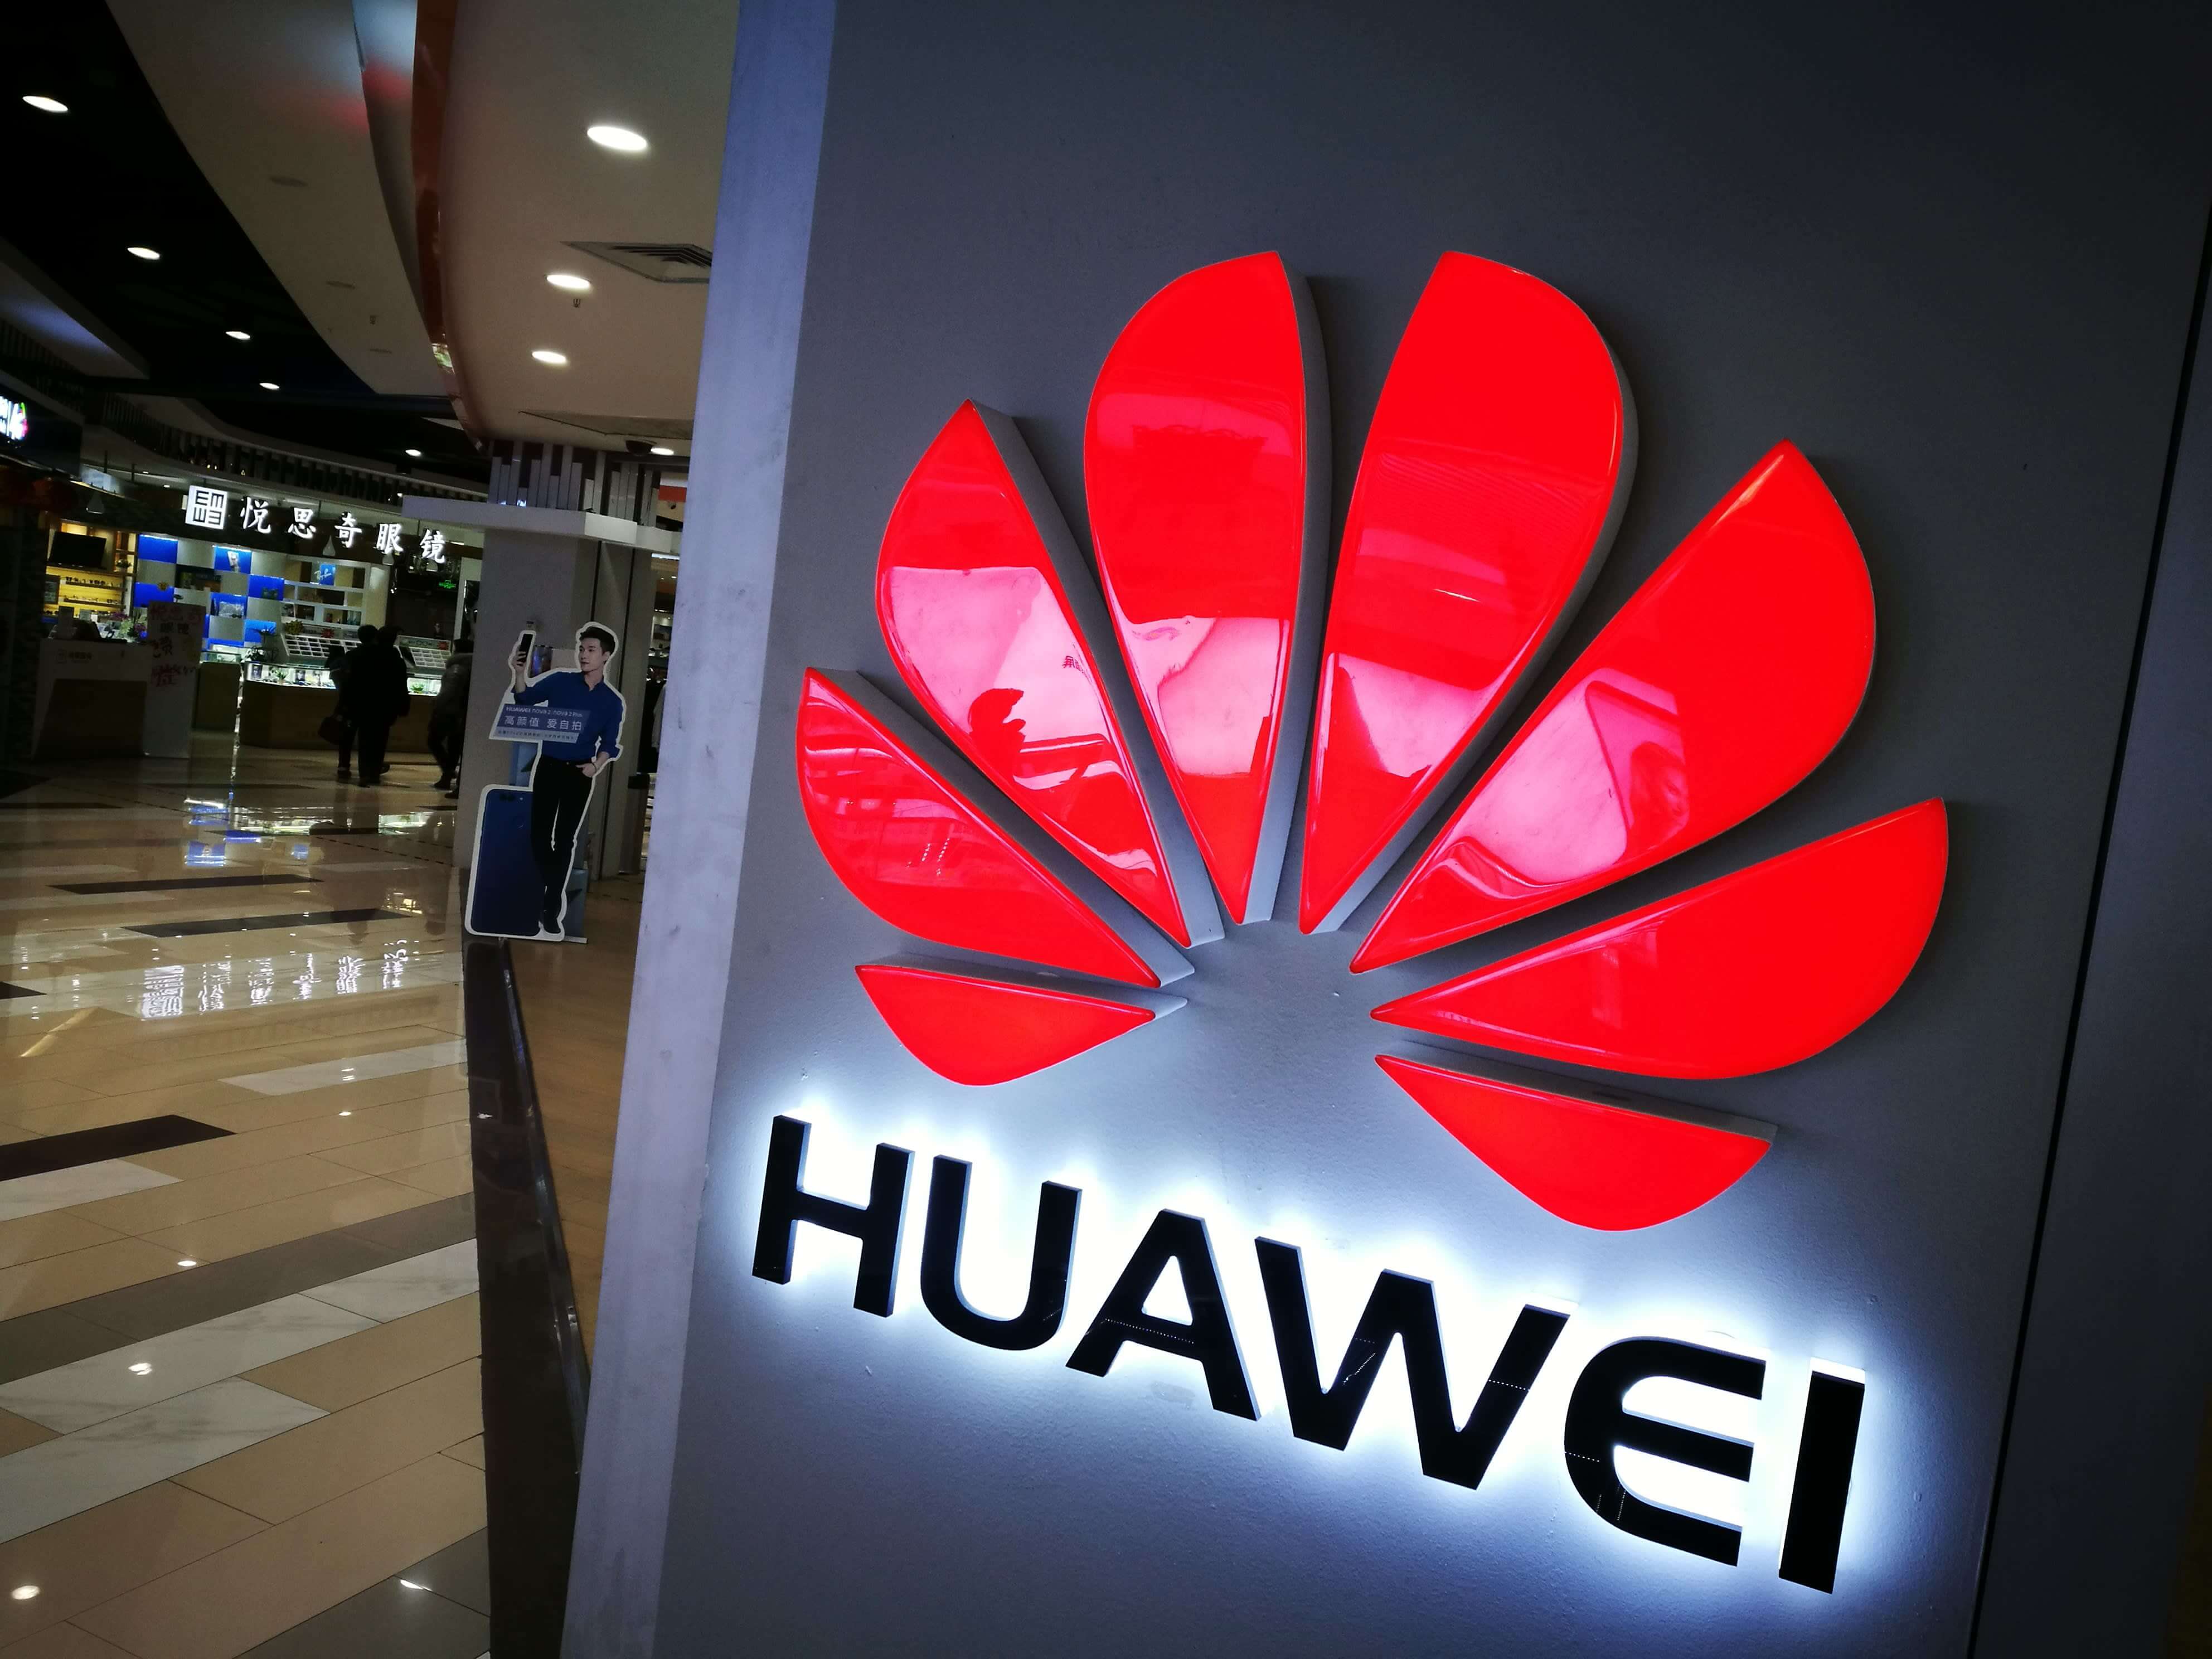 US warns that it could cut intelligence ties with the UK if it uses Huawei's 5G tech